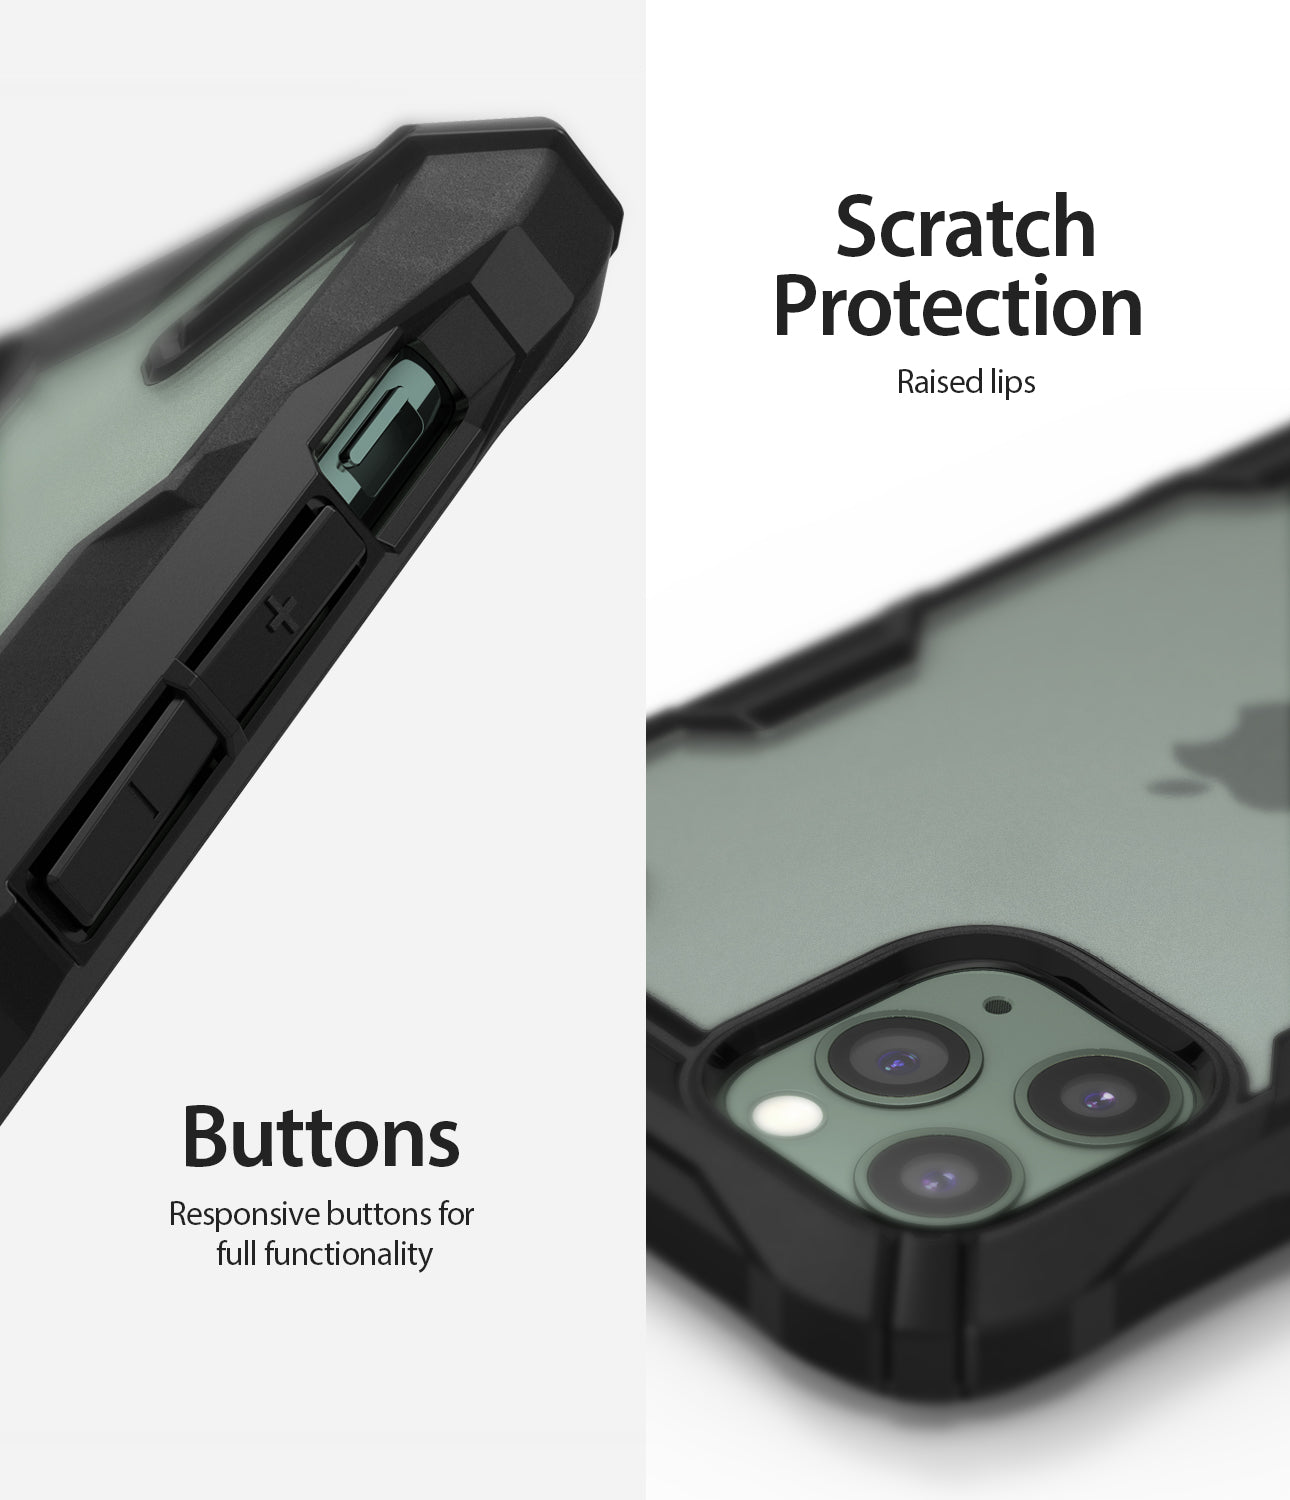 Ringke Fusion-X Matte Designed Case for iPhone 11 Pro Matte Dark Green raised bezel scratch protection buttons